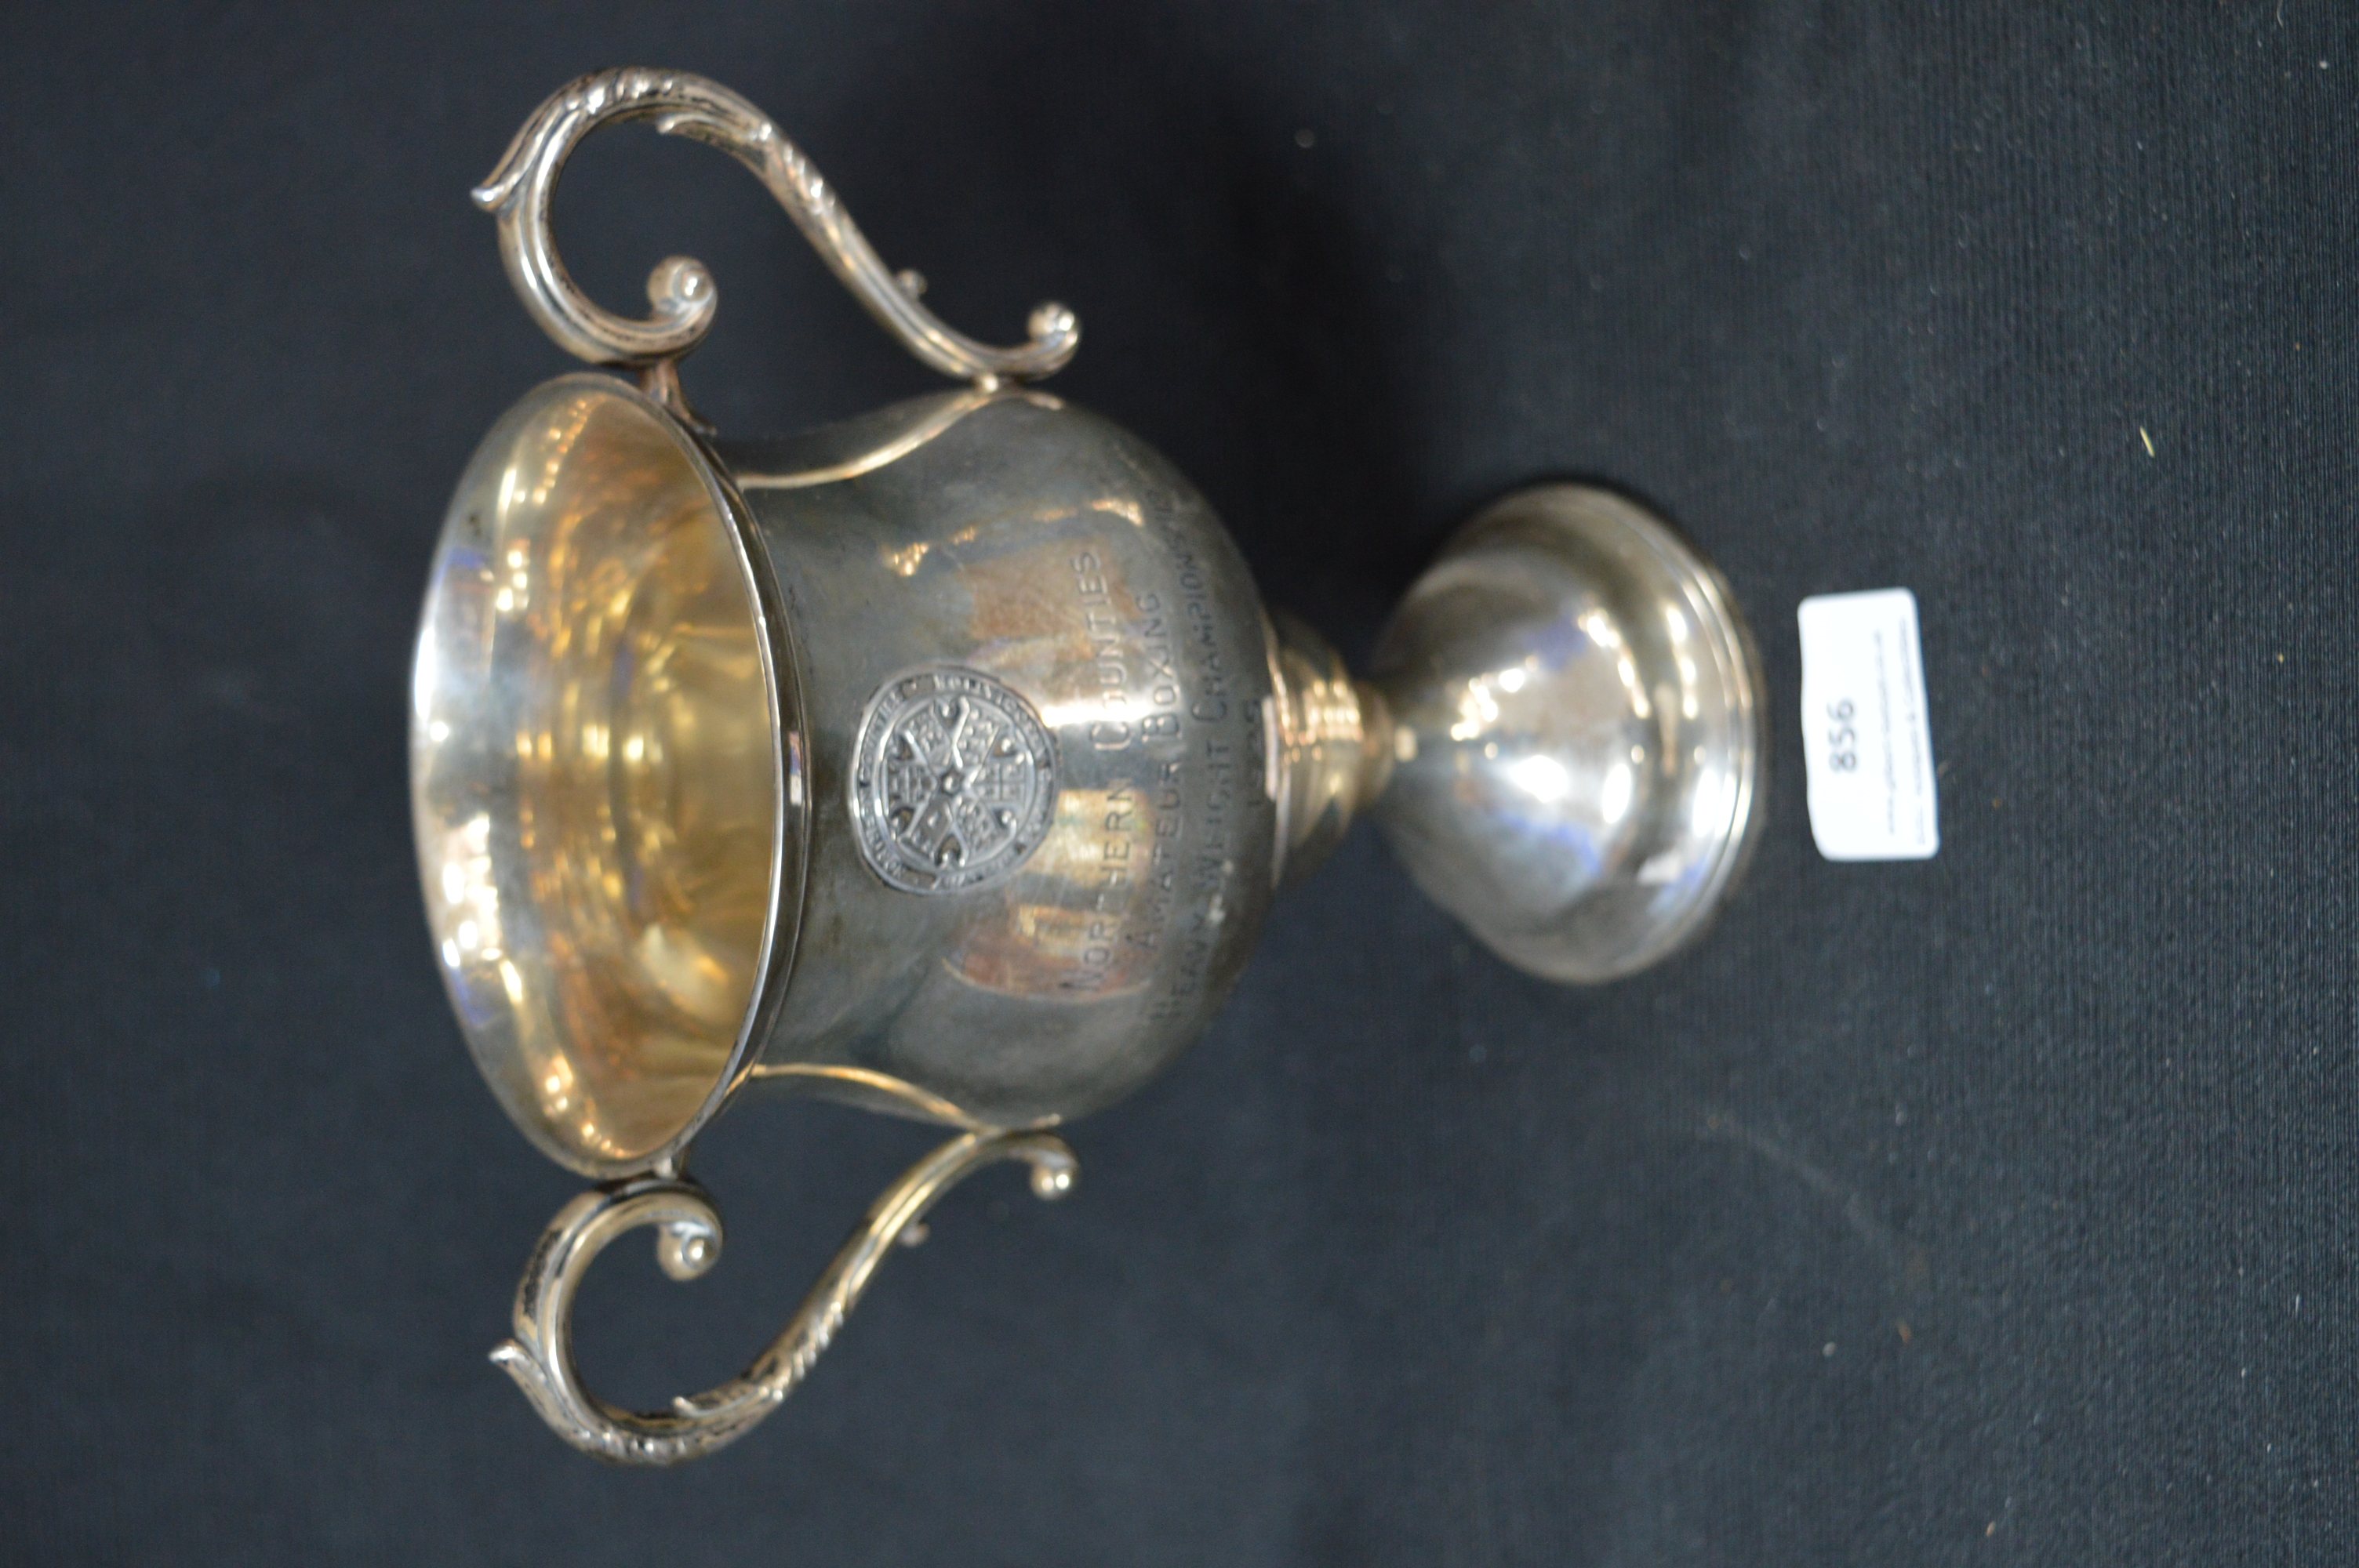 Northern Counties Amateur Boxing Heavyweight Championship Cup 1925 - Sterling Silver